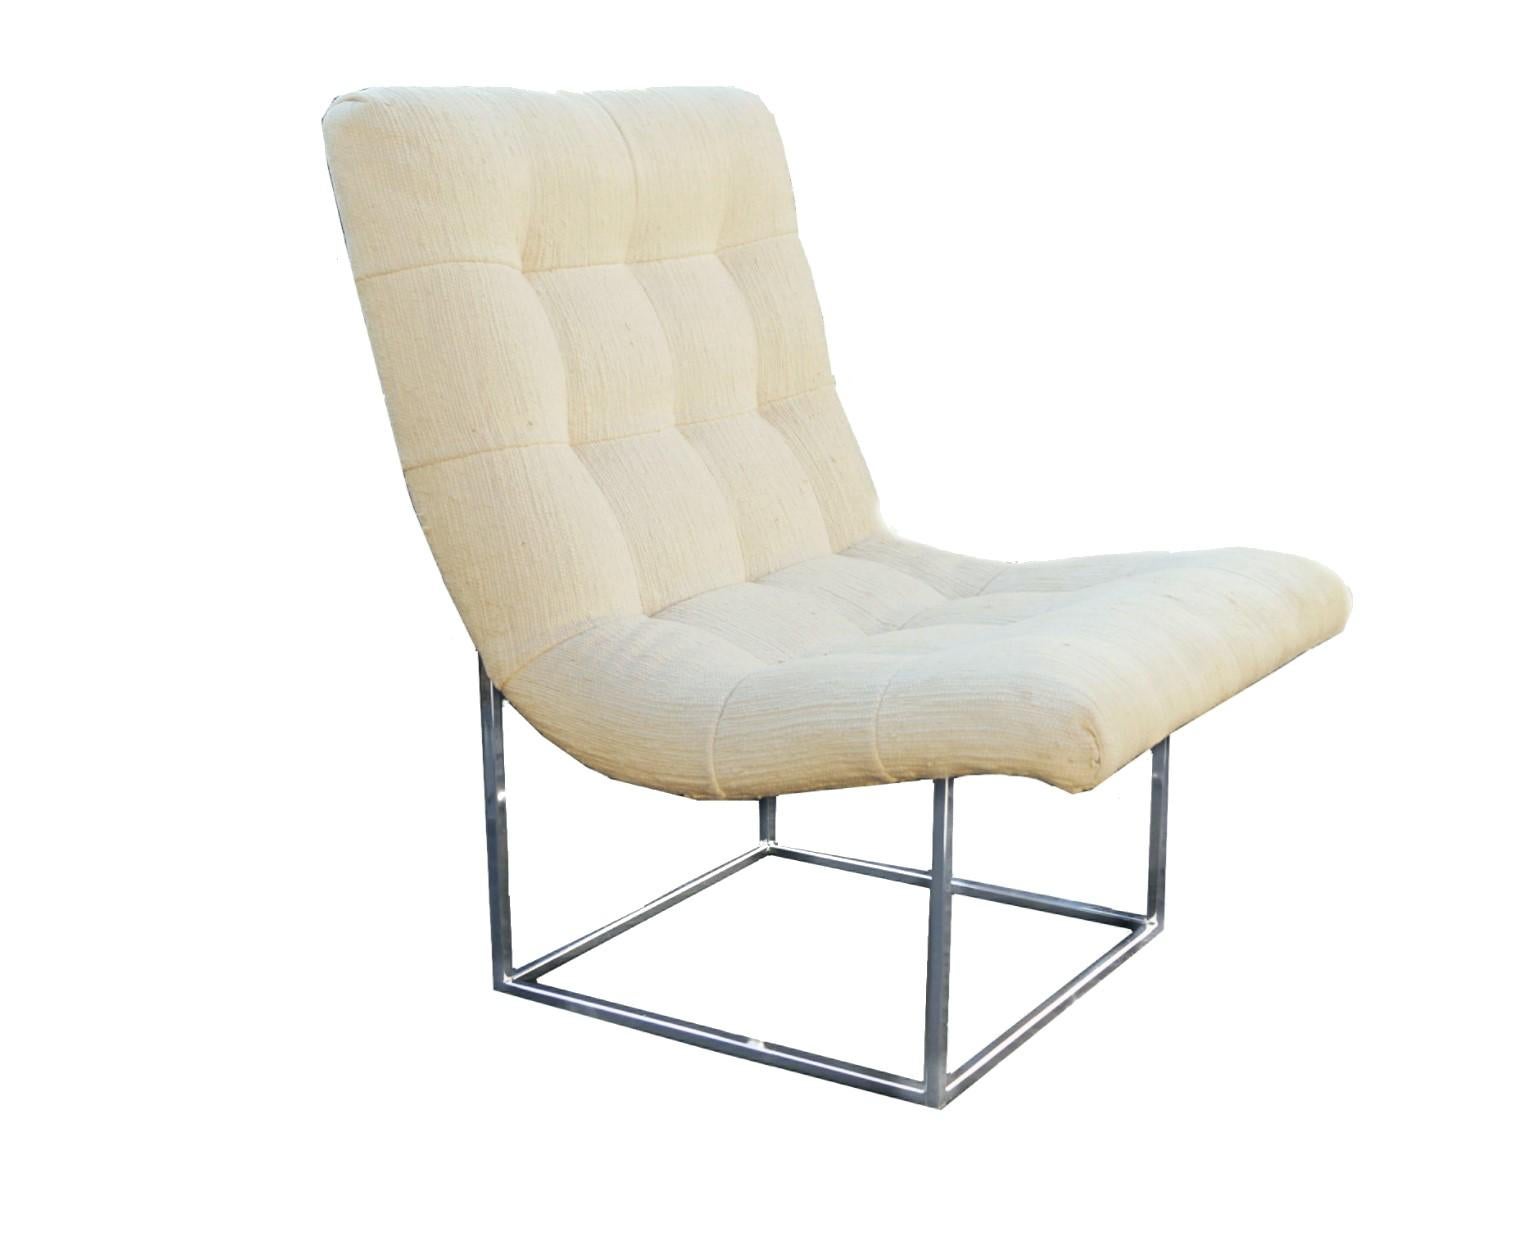 Milo Baughman Thayer Coggin lounge chair. If you are in the New Jersey , New York City Metro Area , please contact us with your delivery zip code, as we may be able to deliver curbside for less than the calculated White Glove rates shown.